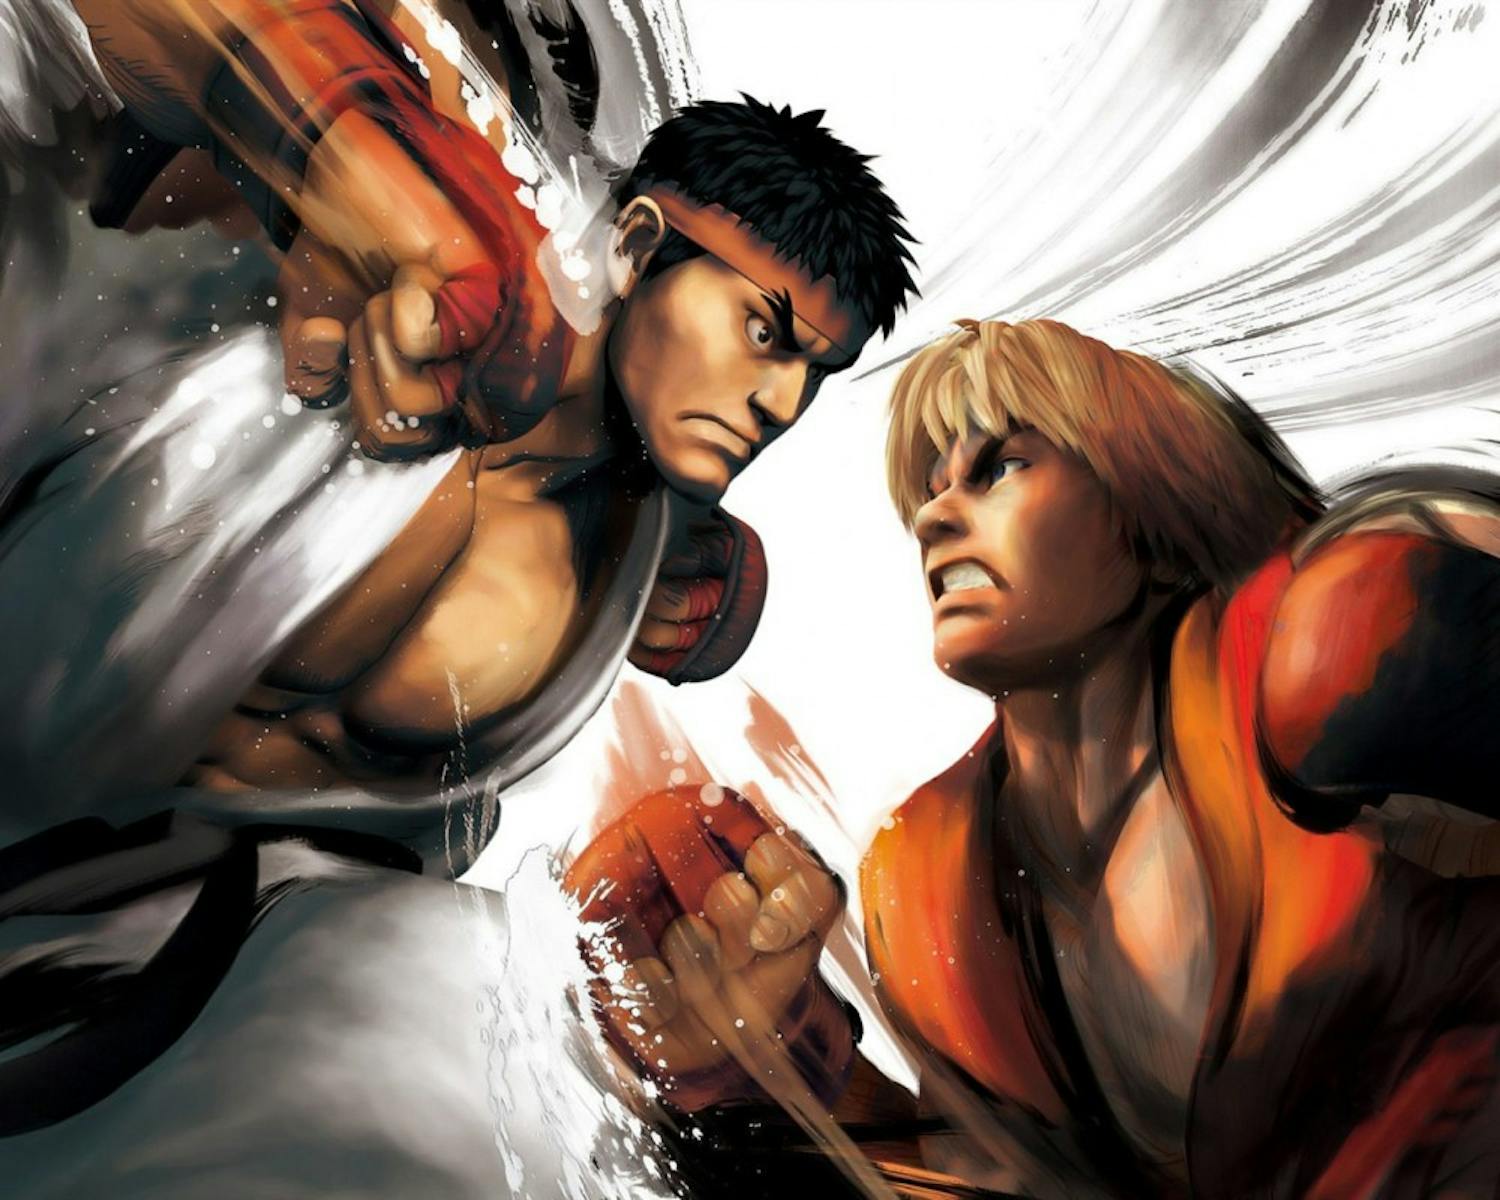 "Street Fighter" is one of the many fighting game franchises to make their way into mainstream culture.